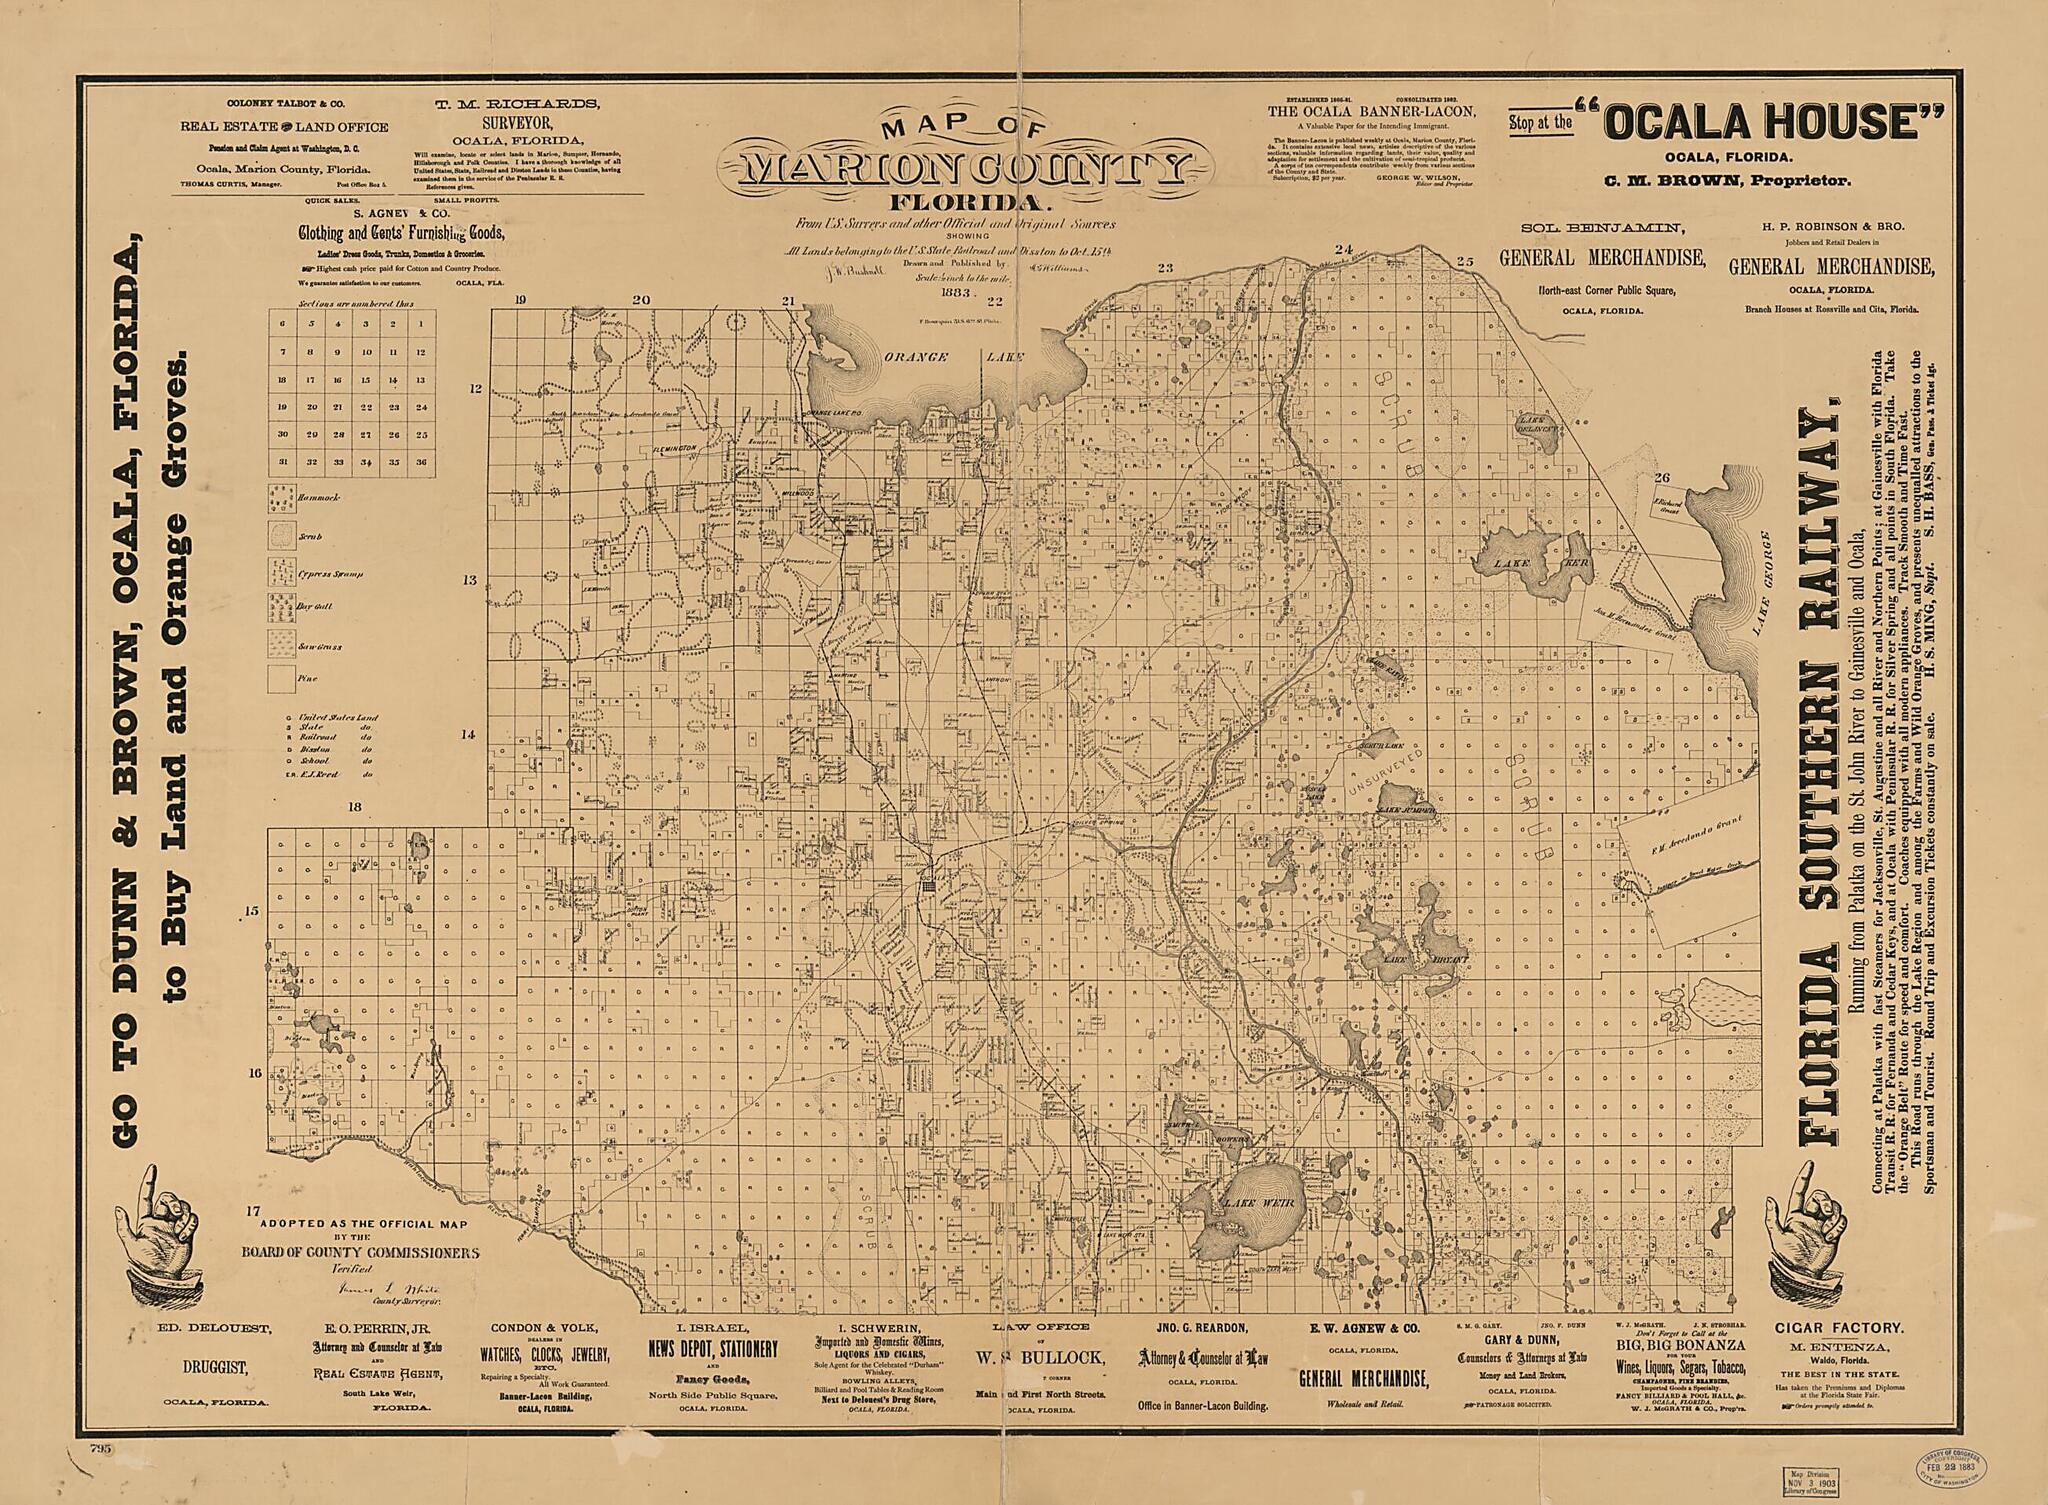 This old map of Map of Marion County, Florida : from U.S. Surveys and Other Official and Original Sources Showing All Lands Belonging to the U.S. State Railroad and Disston to Oct. 15th from 1883 was created by F. (Frederick) Bourquin, J. W. Bushnell, A.